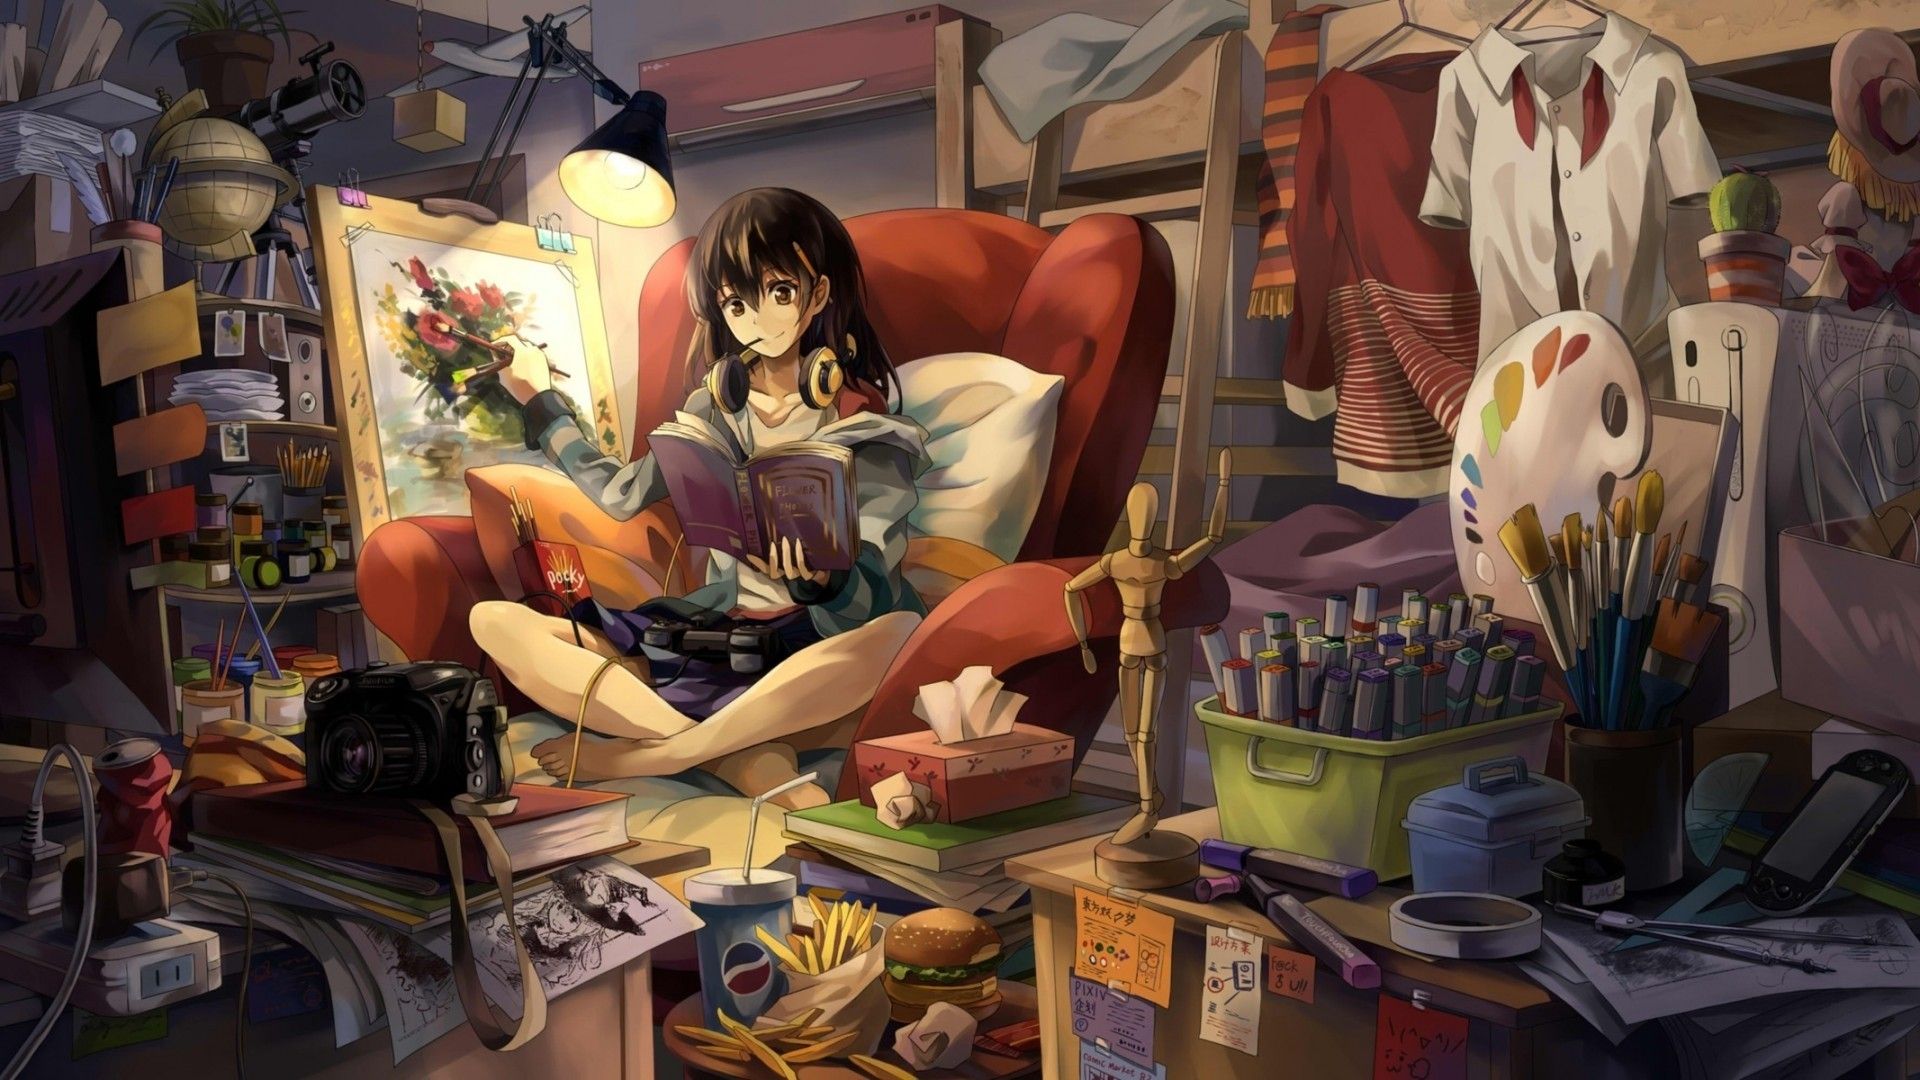 Download 1920x1080 Artist Girl, Painting Room, Anime Girl Wallpaper for Widescreen